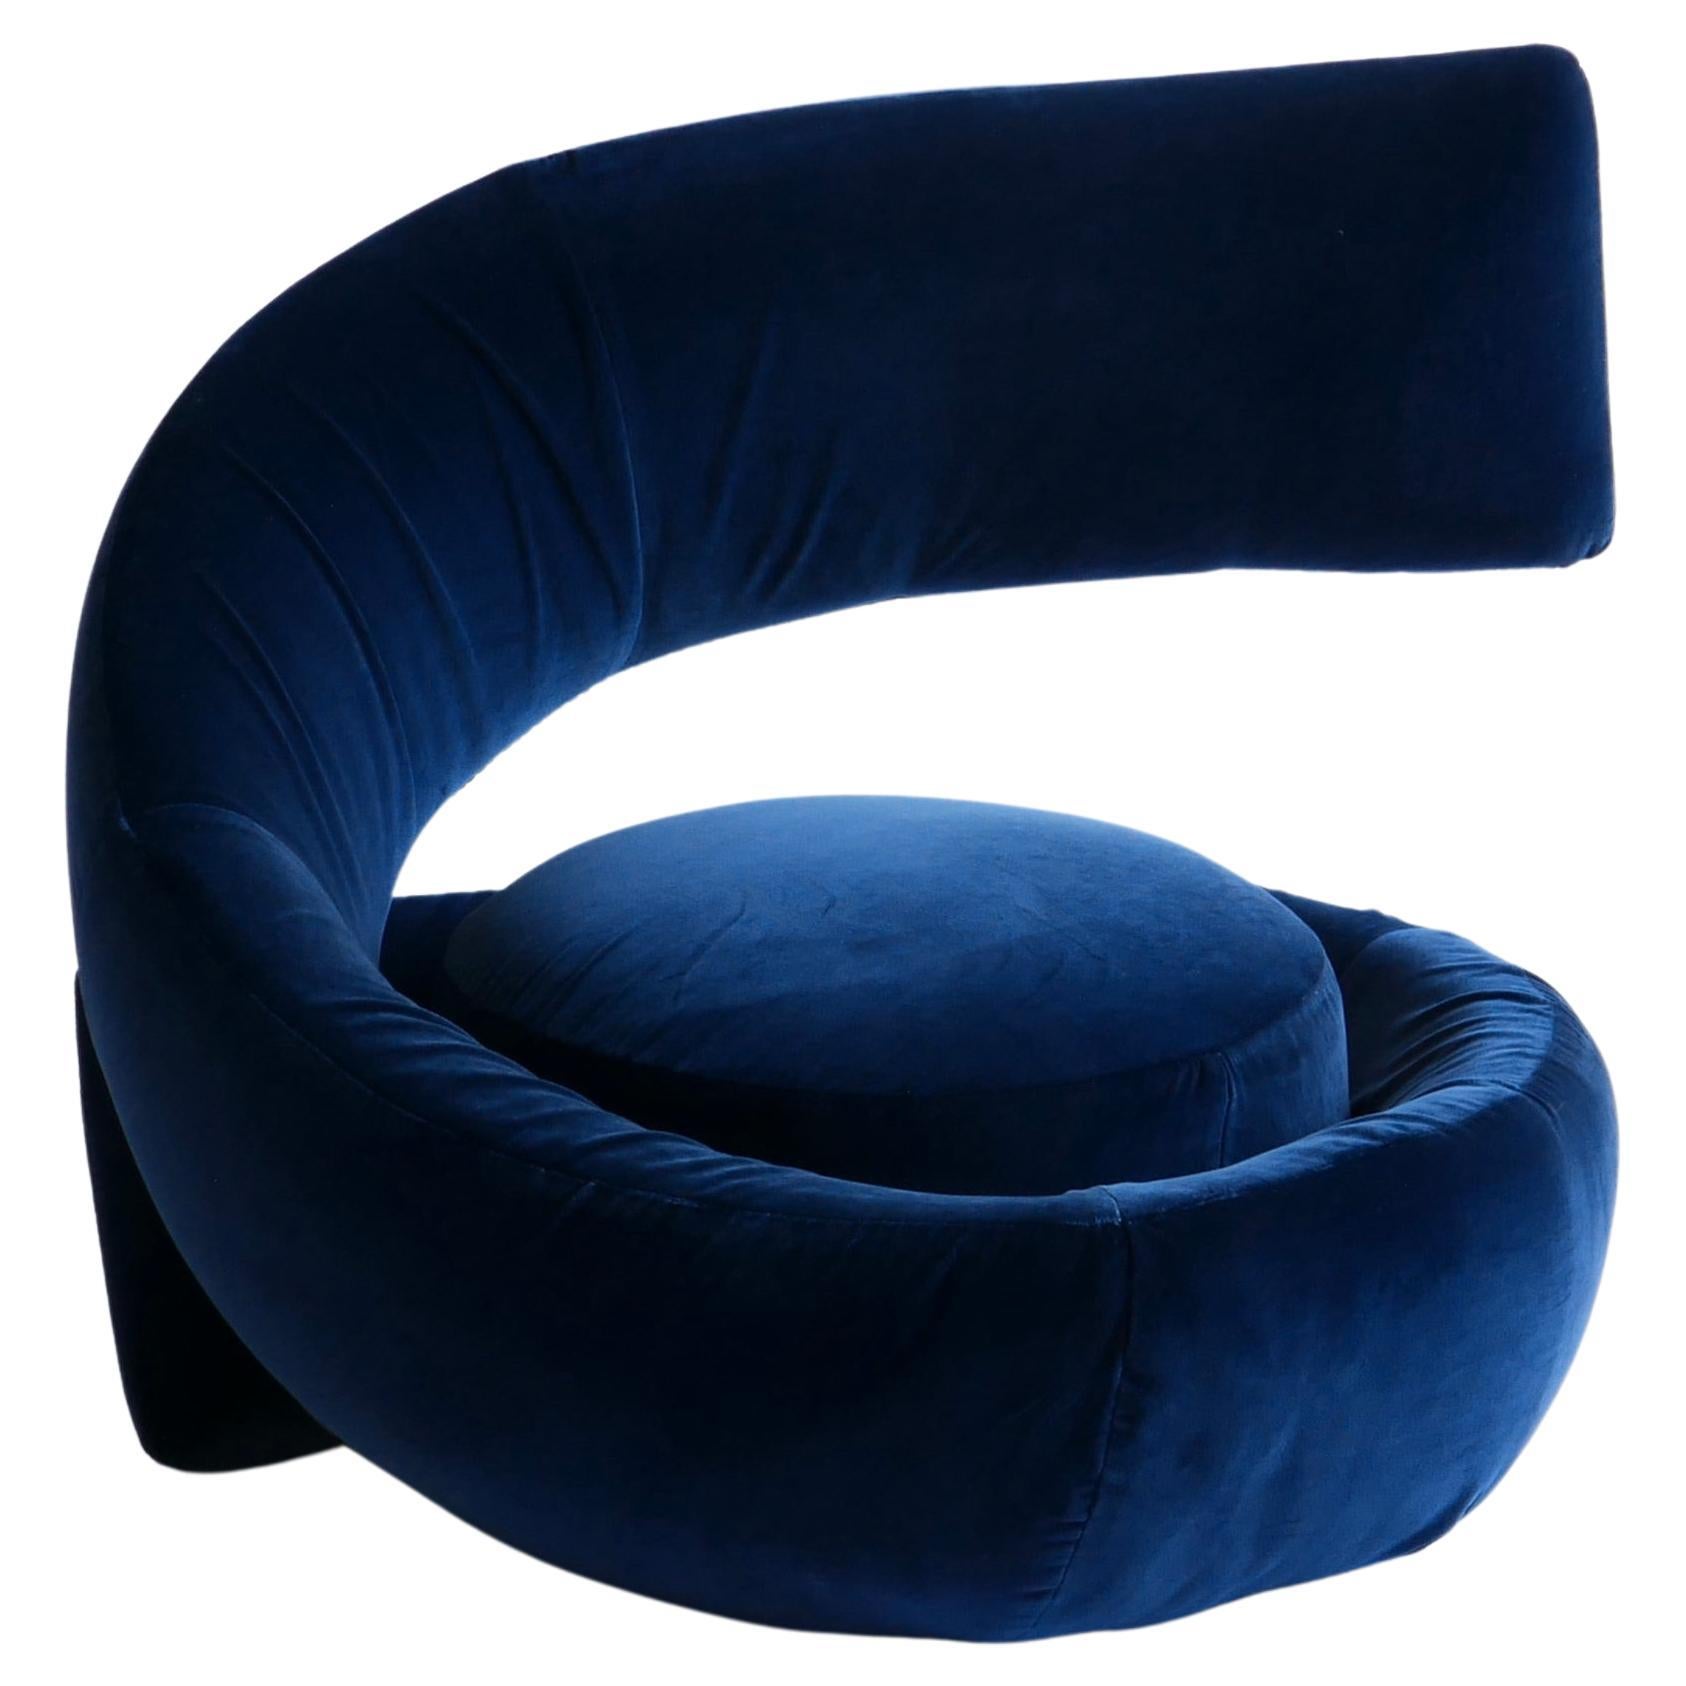 Rare spiral armchair attributed to Marzio Cecchi in the 1970s. The eclectic armchair has an unusual and extravagant vortex-shaped design. 
From its base it spreads in the shape of a spiral which first merges with its seat and then flows into the